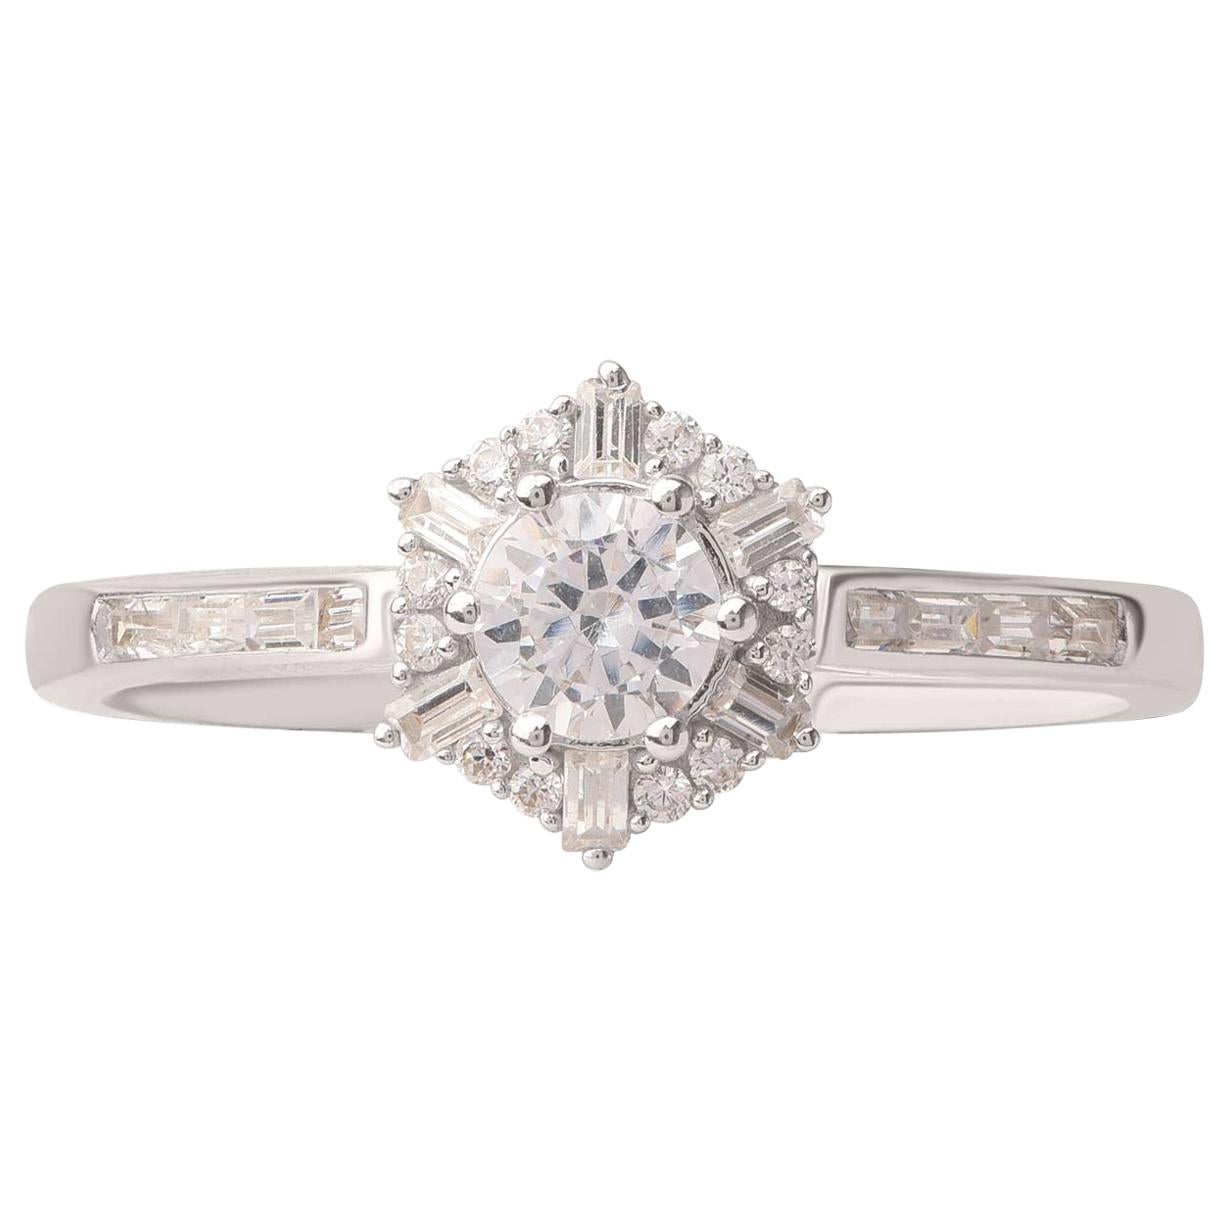 TJD 0.50 Carat Round and Baguette Diamond 18 K White Gold Diamond Cluster Ring For Sale